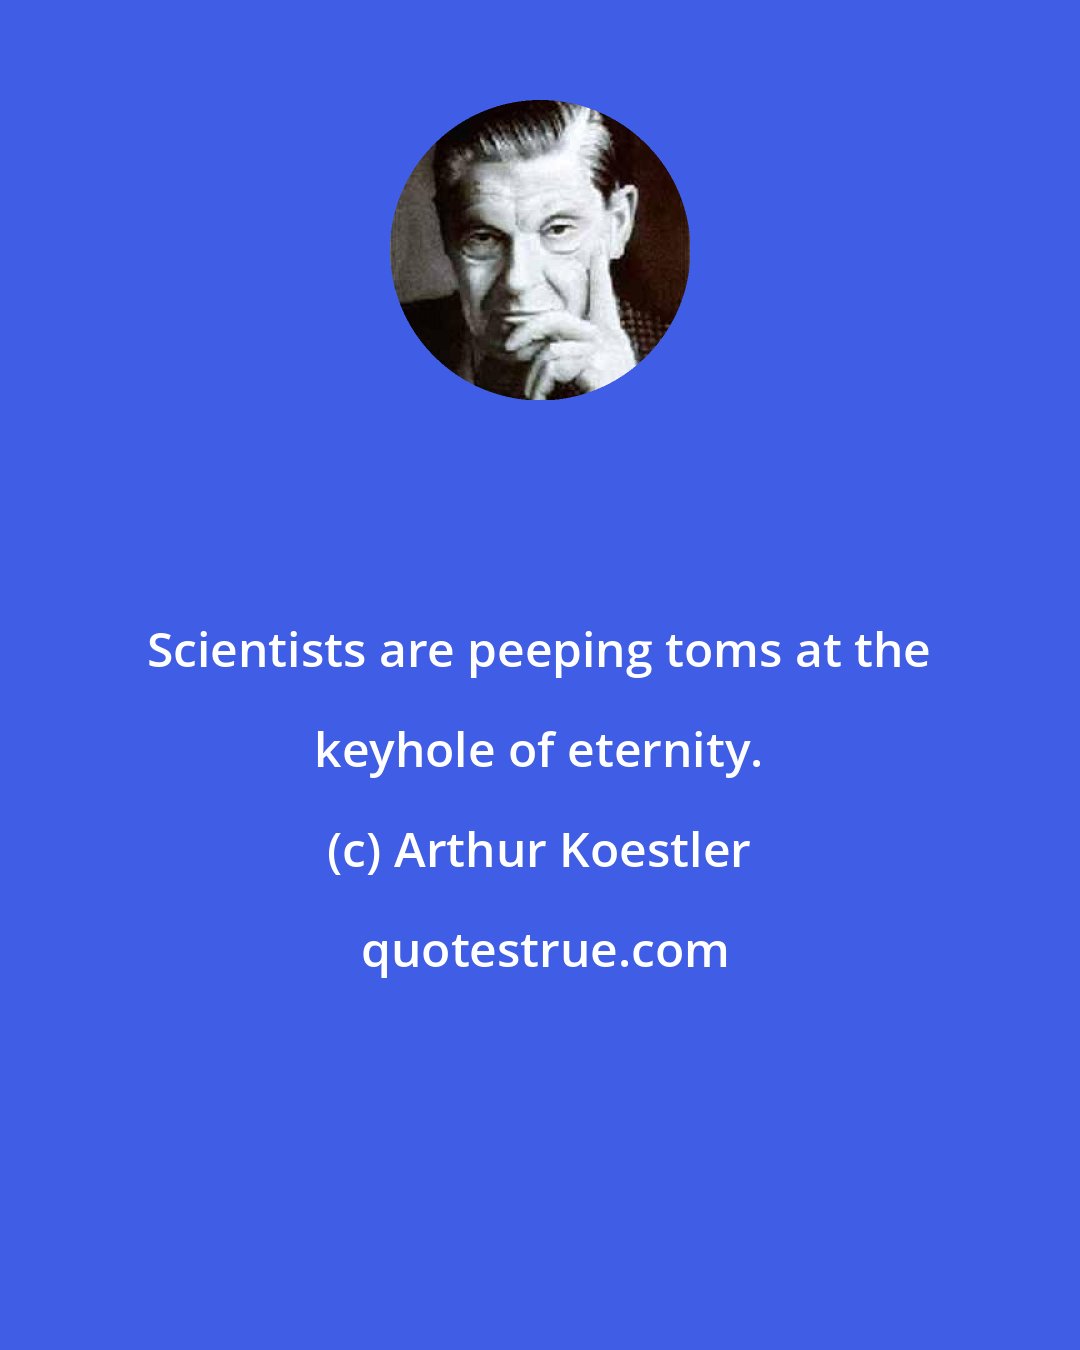 Arthur Koestler: Scientists are peeping toms at the keyhole of eternity.